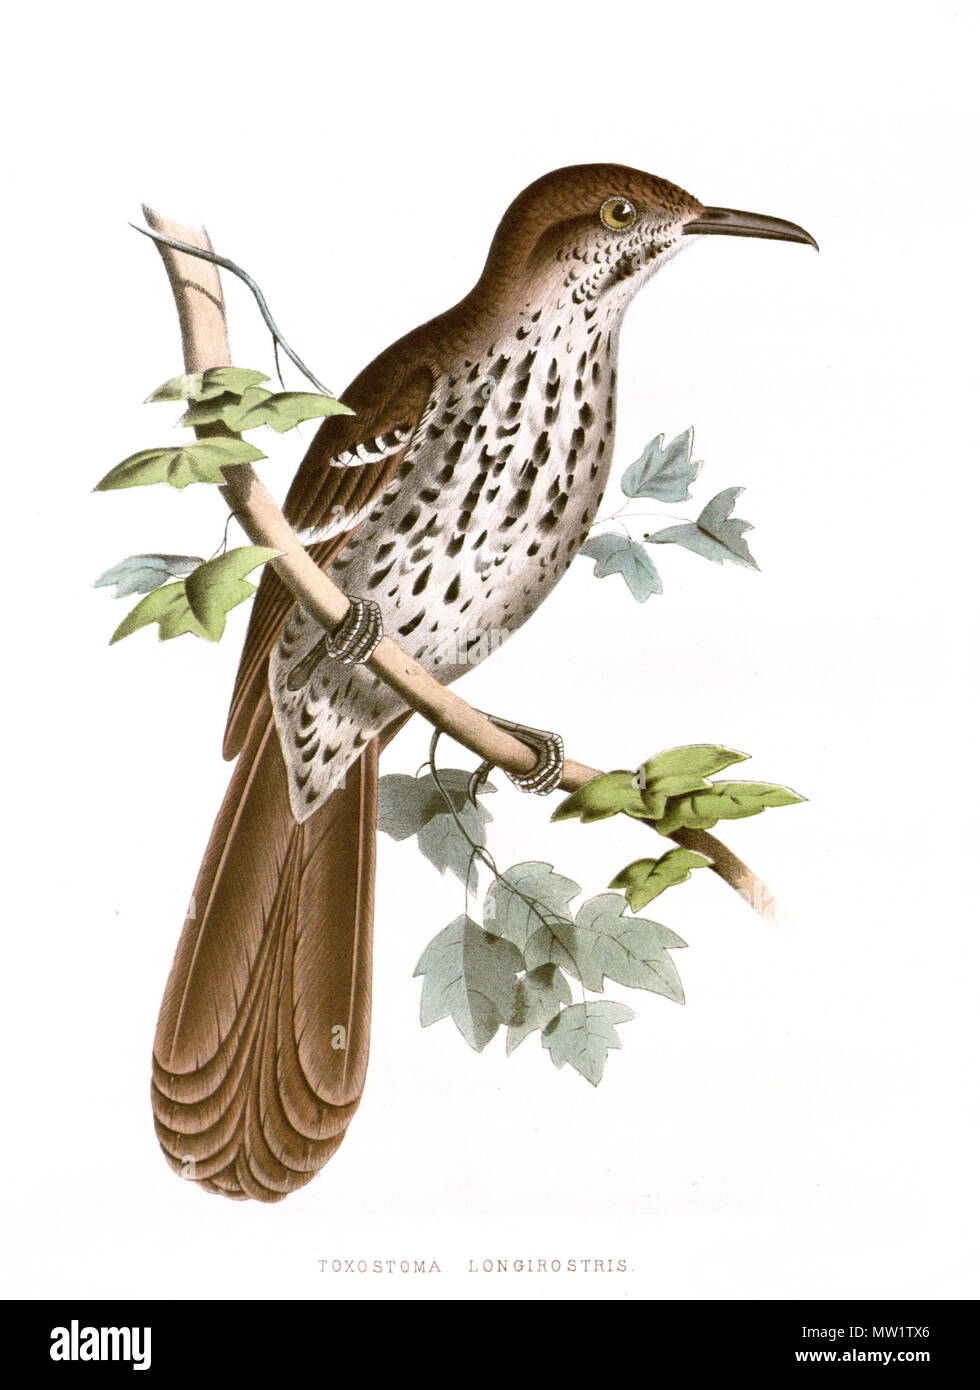 . English: Adult Long-billed Thrasher, Toxostoma longirostre senetti, illustration from Birds of the Boundary Deutsch: Langschnabel-Spottdrossel (Toxostoma Longirostre) . 1860. Painting by Spencer F. Baird Scan or photo by Earwig (talk page in German) 612 Toxostoma longirostre Boundary Survey Painting Stock Photo